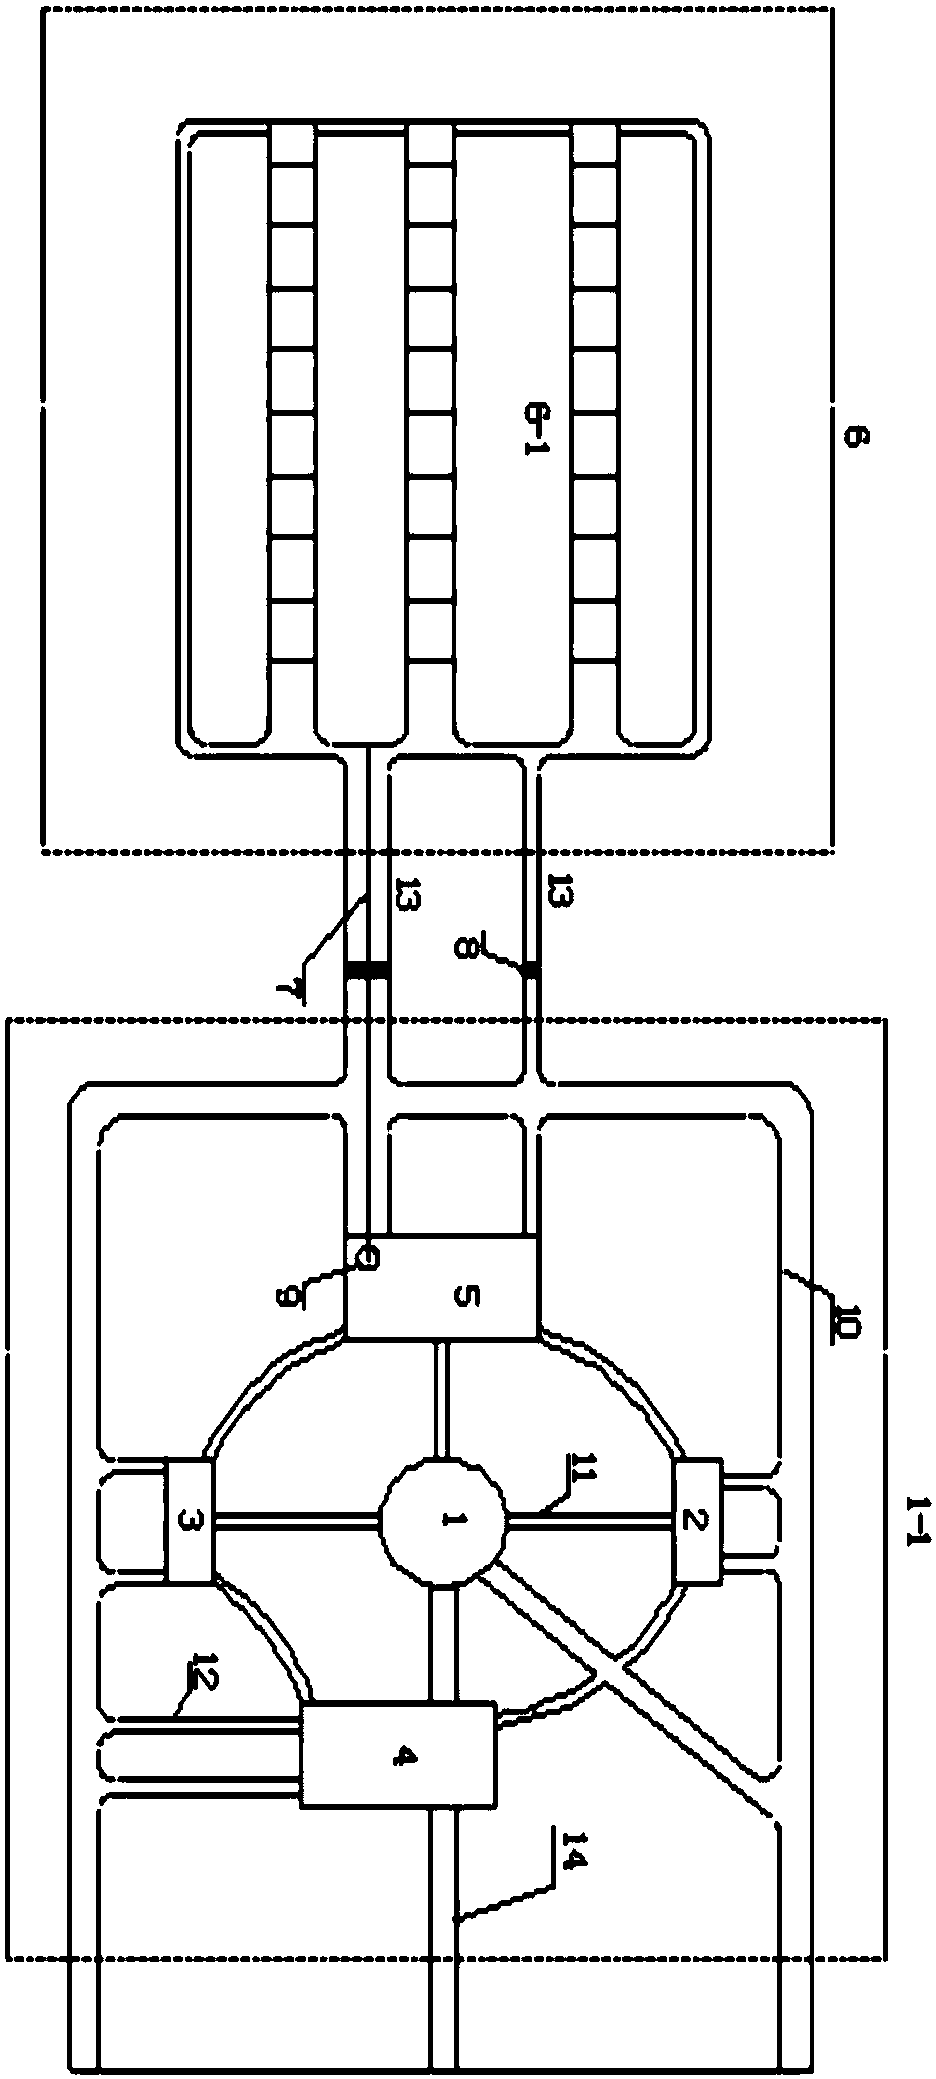 An underground nuclear power plant with a disposal site for low and intermediate radioactive waste